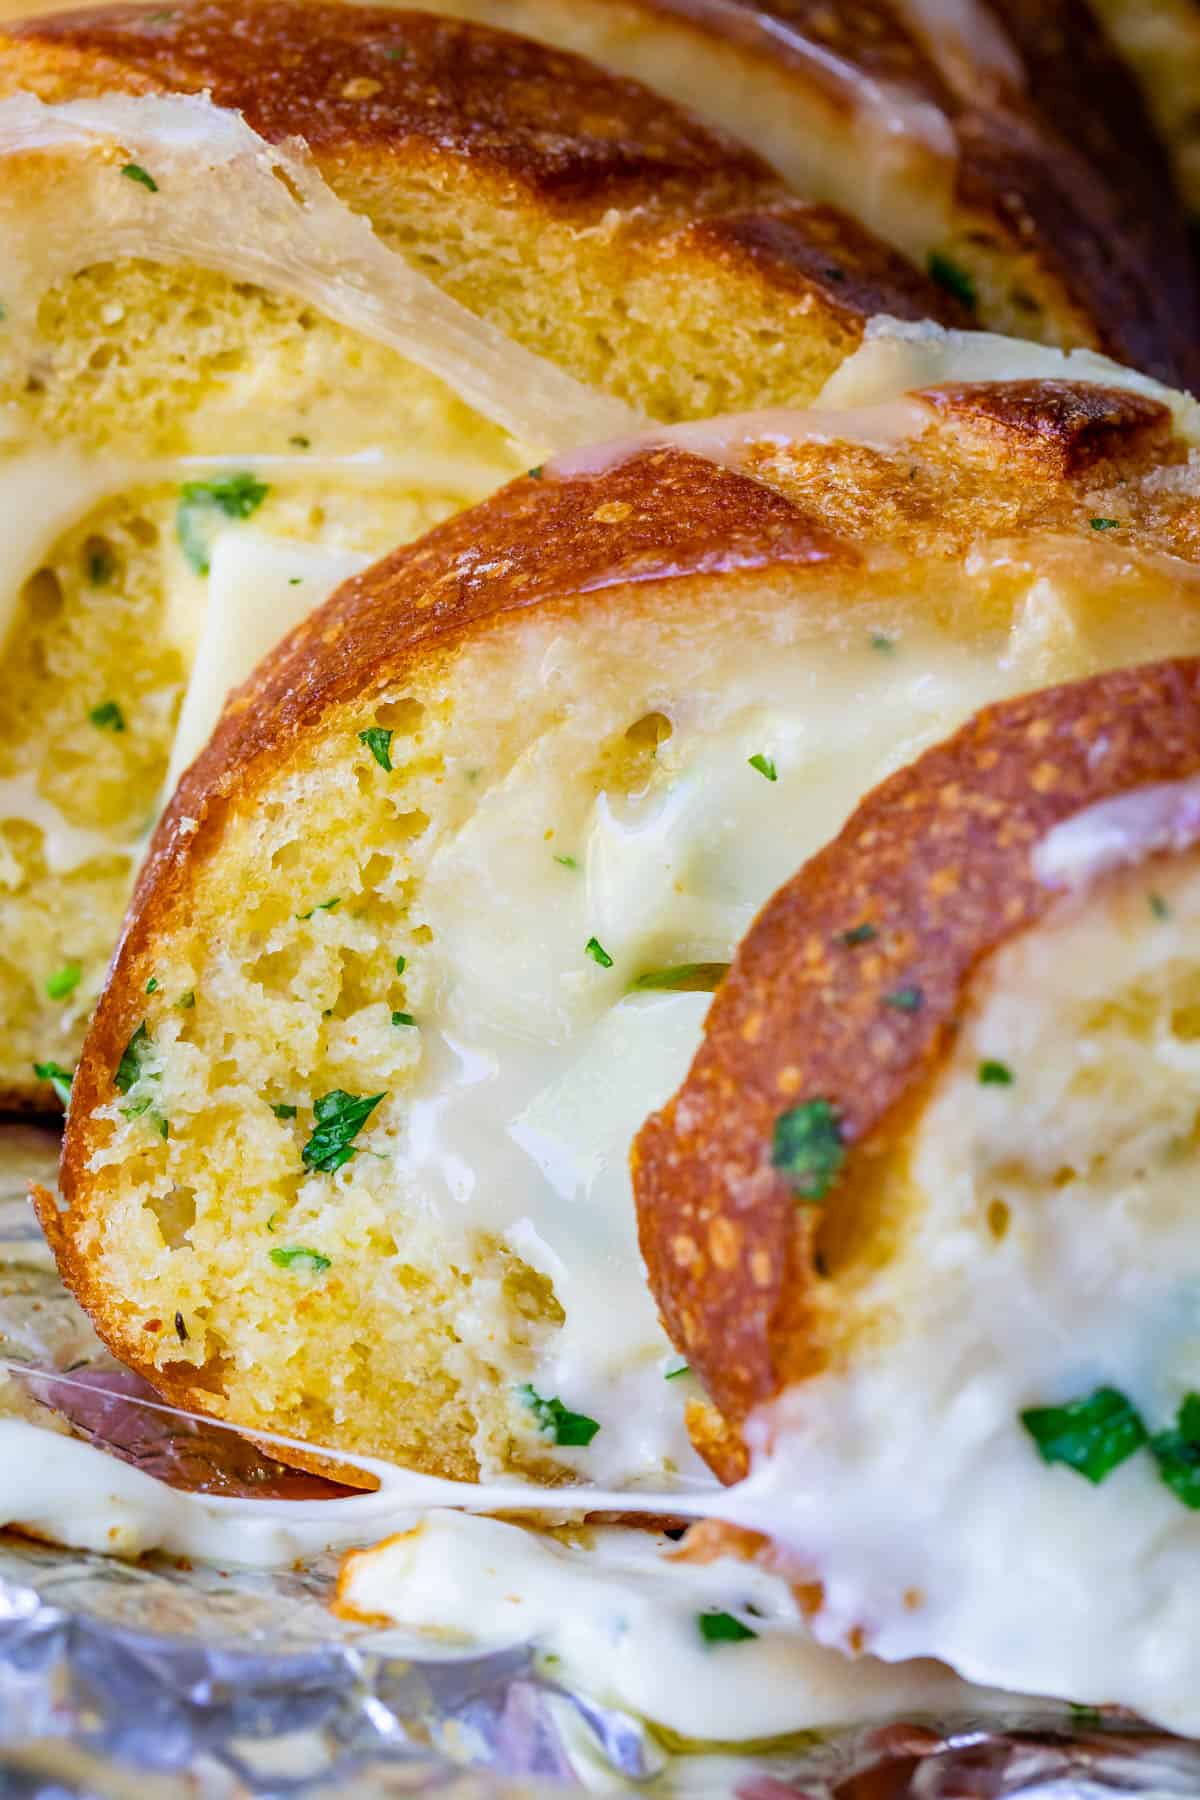 upright cheesy bread sprinkled with parsley on foil.